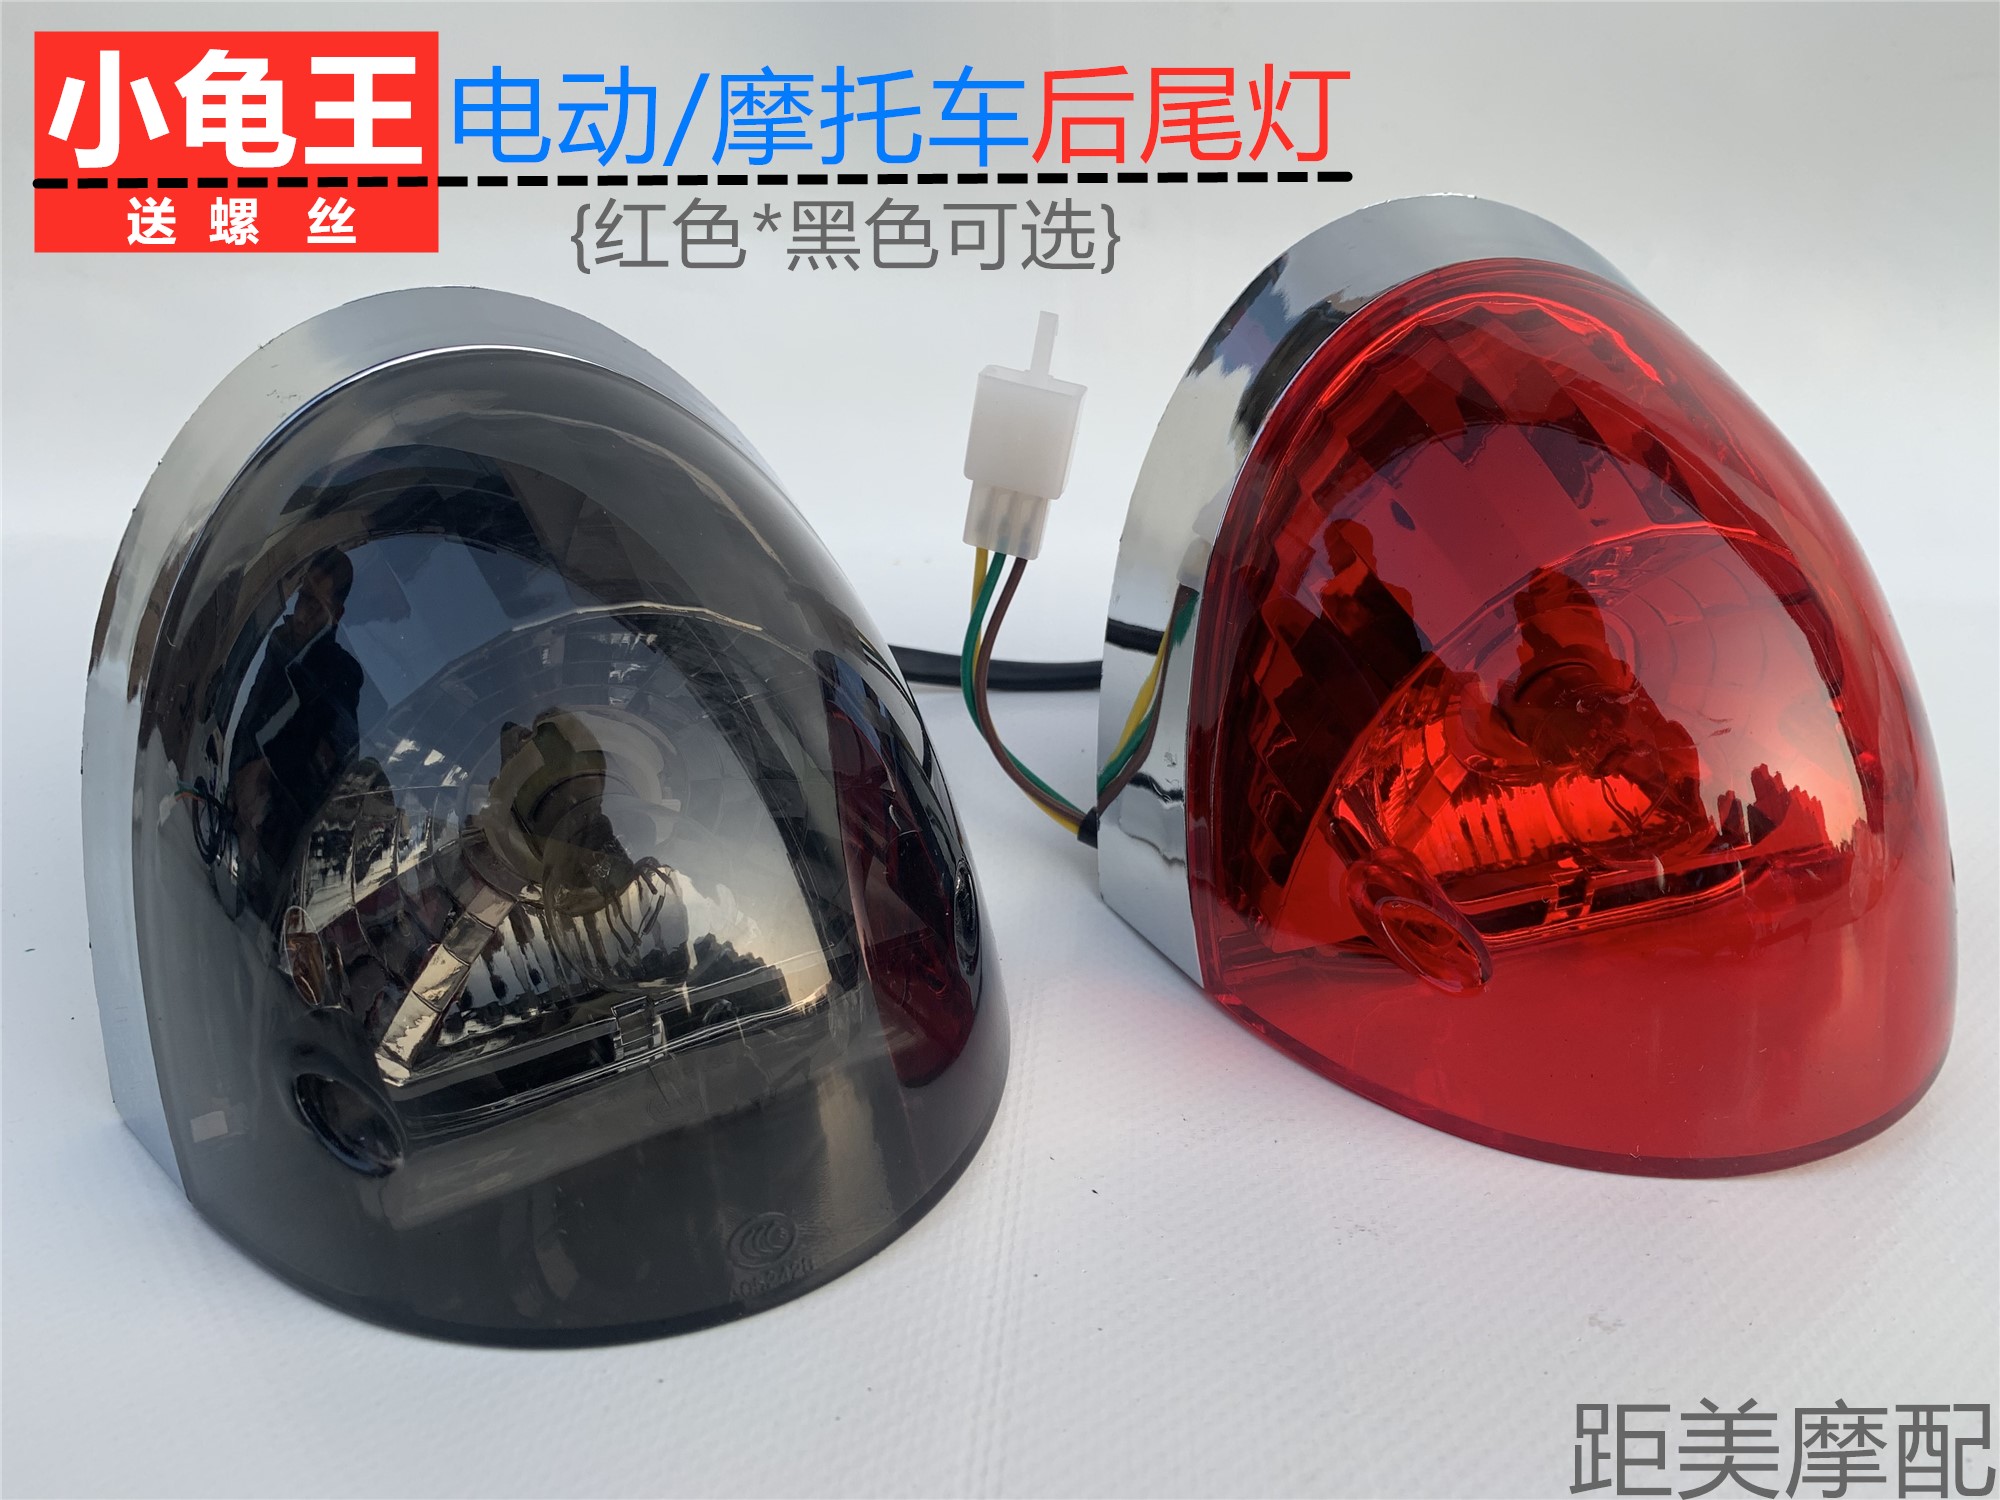 Footprint car Yulong Turtle King Electric Vehicle Motorcycle Motorcycle Tail Lighting Lights Bad Light Tail Lights assembly